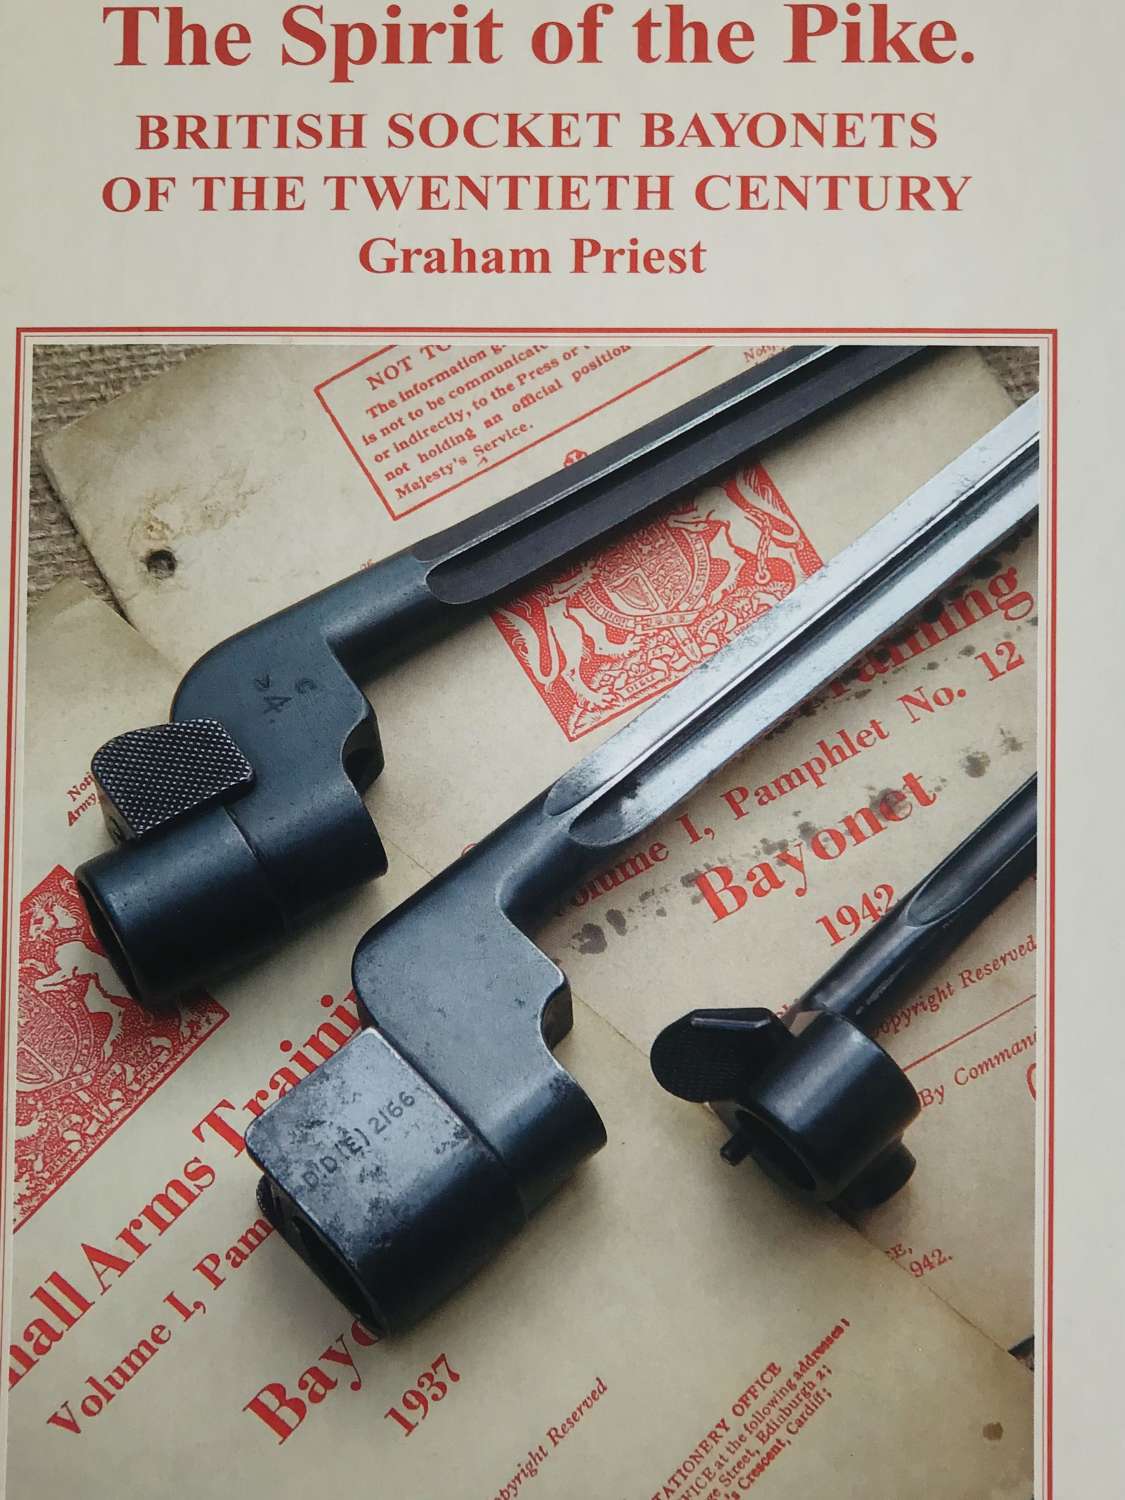 A signed copy of” the spirit of the pike” by Graham priest